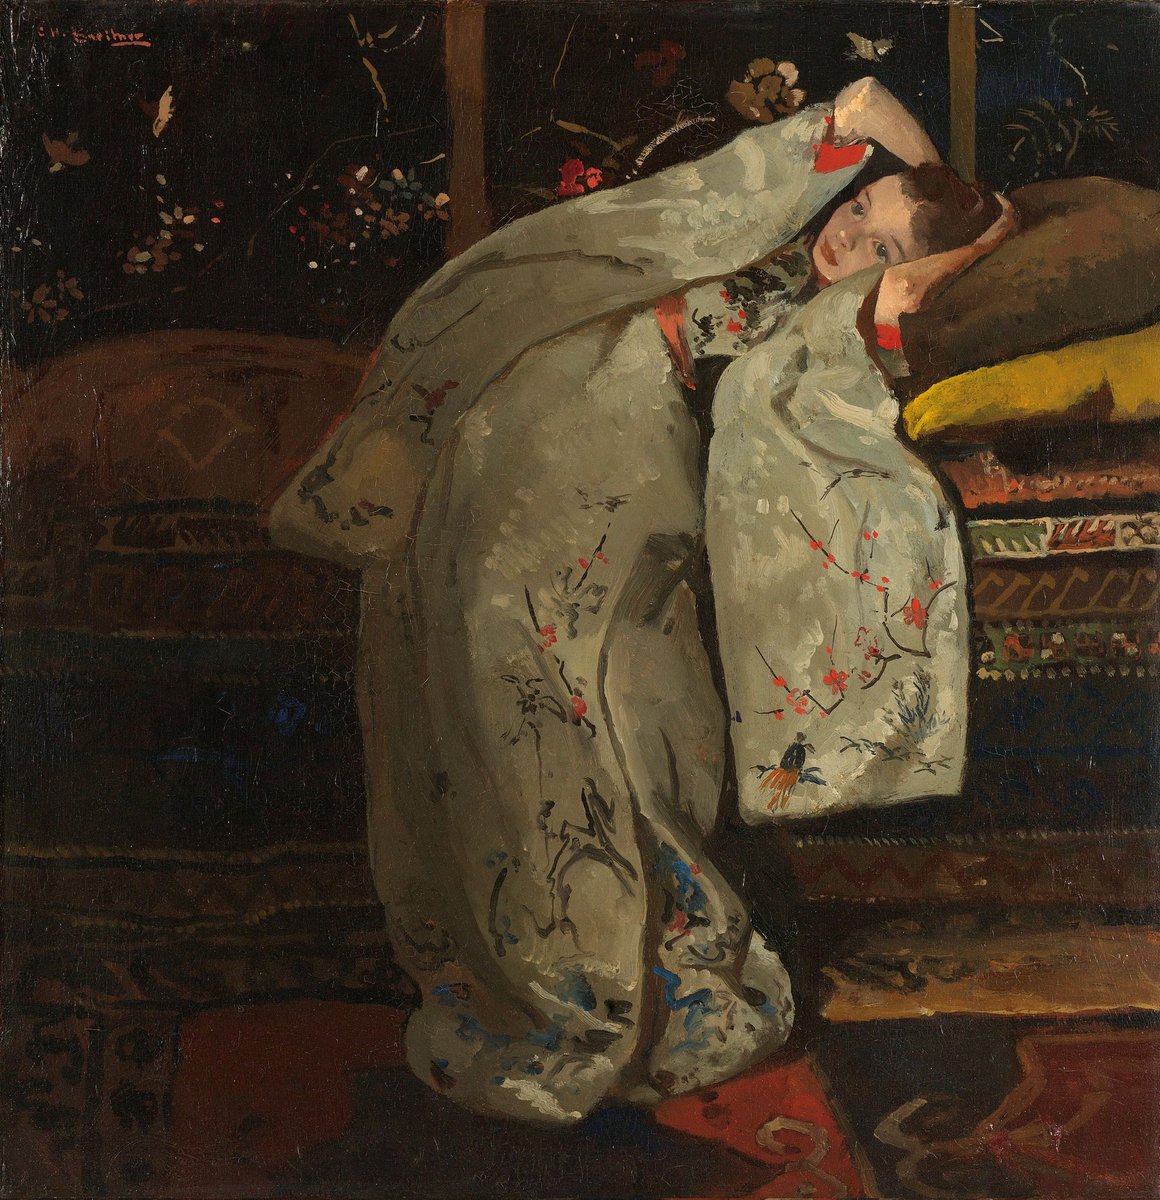 Geesje Kwak was only 16 years old when Breitner painted her here. The kimono was such a beloved subject for Breitner to paint that he made thirteen paintings of girls in kimonos, with Geesje as his primary model. 🚨 Discover more of our Stories: rijksmuseum.nl/en/stories